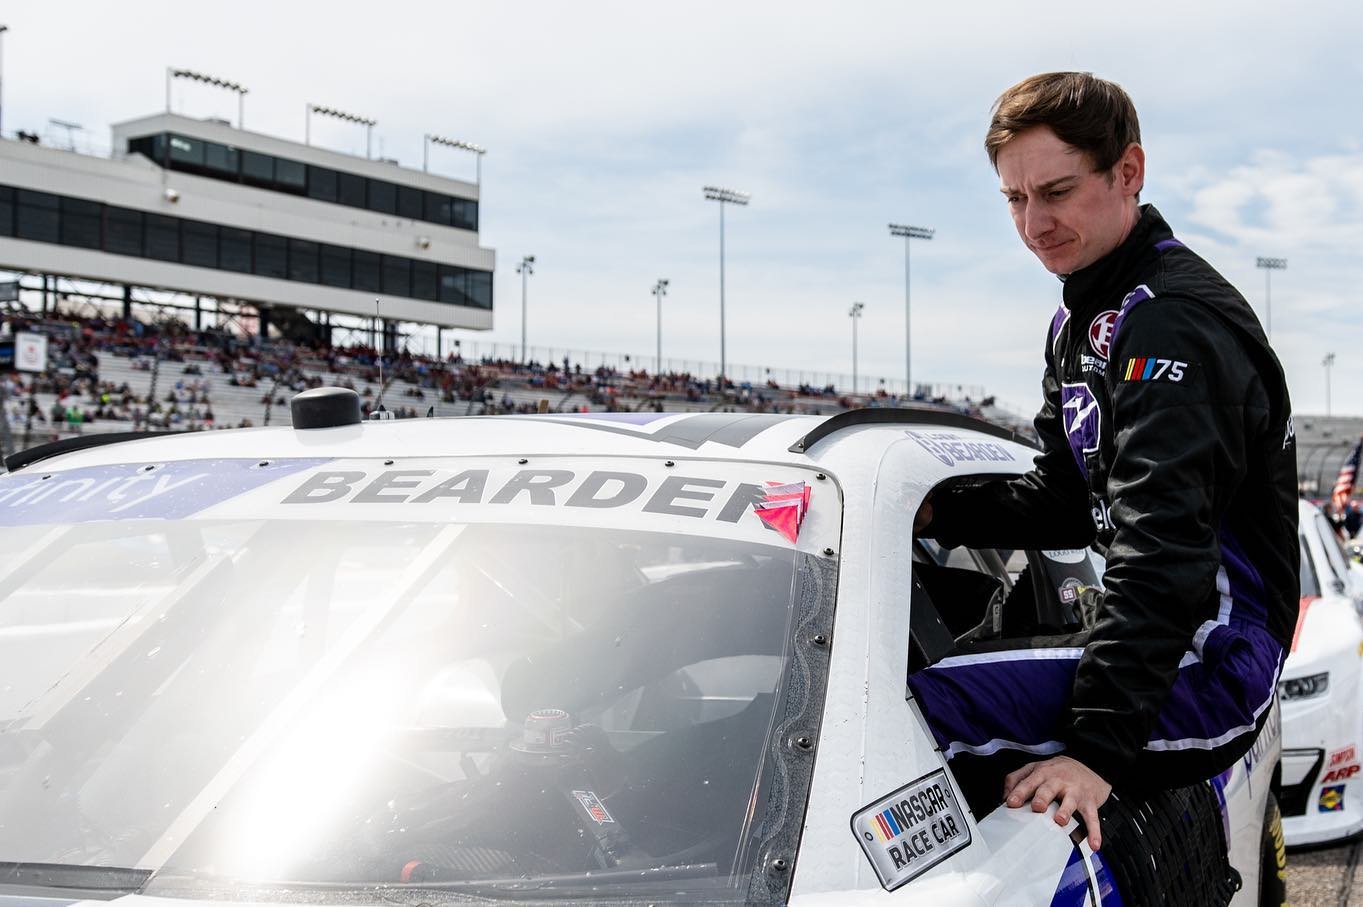 How about our guy @logan_bearden , in his @xfinityracing debut Logan brought home a 22nd place finish and a stage point in the 2nd stage! 

This weekend was just the beginning and we&rsquo;re excited to have him hop in the car again soon!